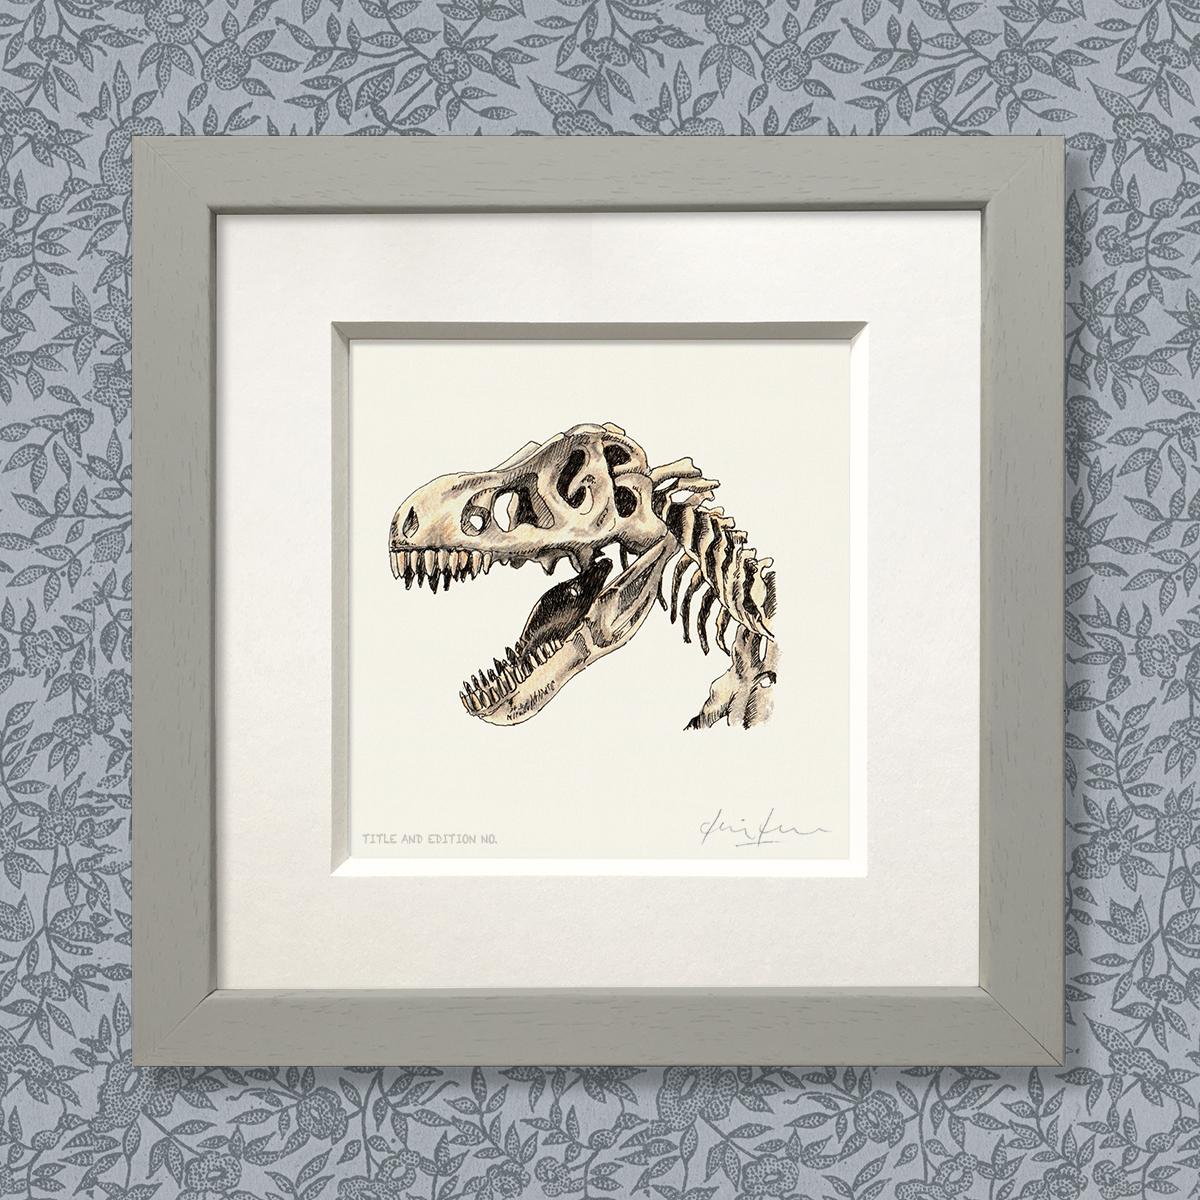 Limited edition print from pen & ink and coloured pencil drawing of a T Rex in a grey frame